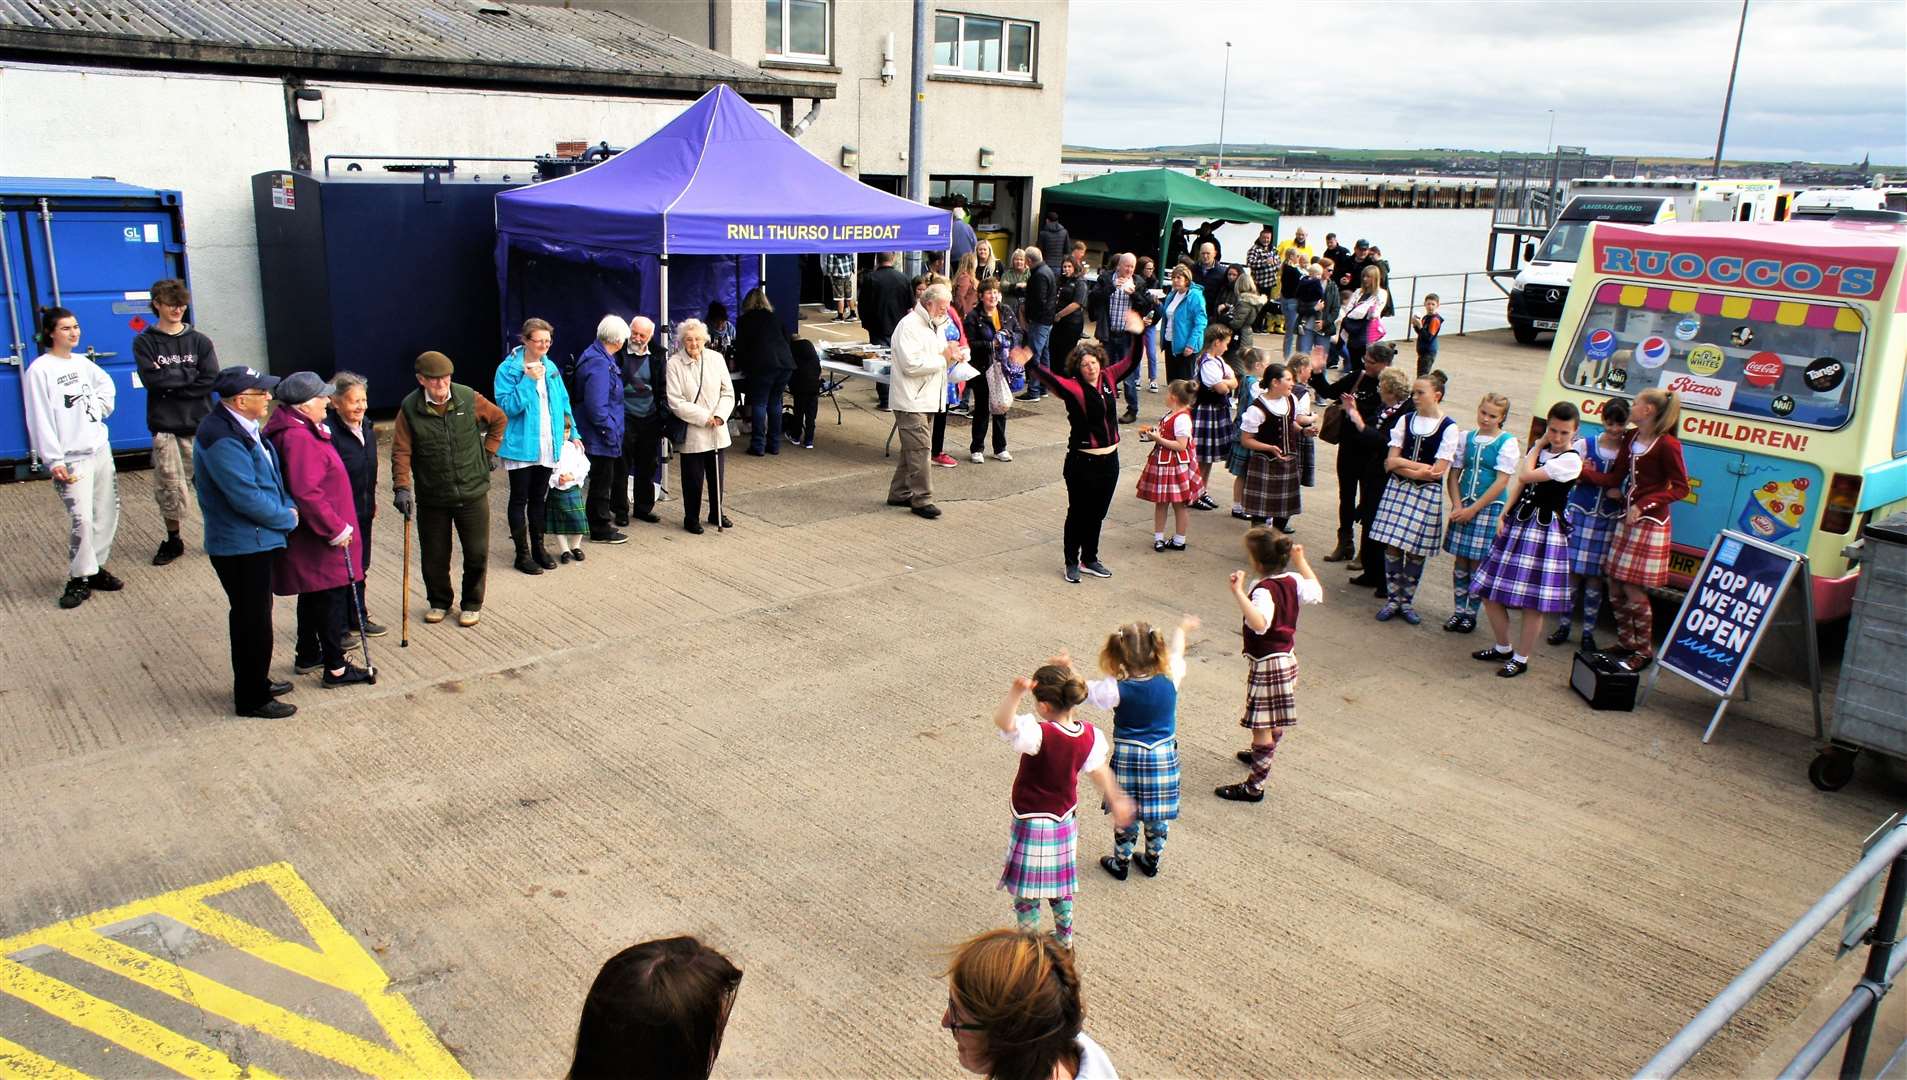 Highland dancing at the open day. The RNLI souvenir shop was open and there was a baking stall, refreshments and a barbecue. Picture: DGS